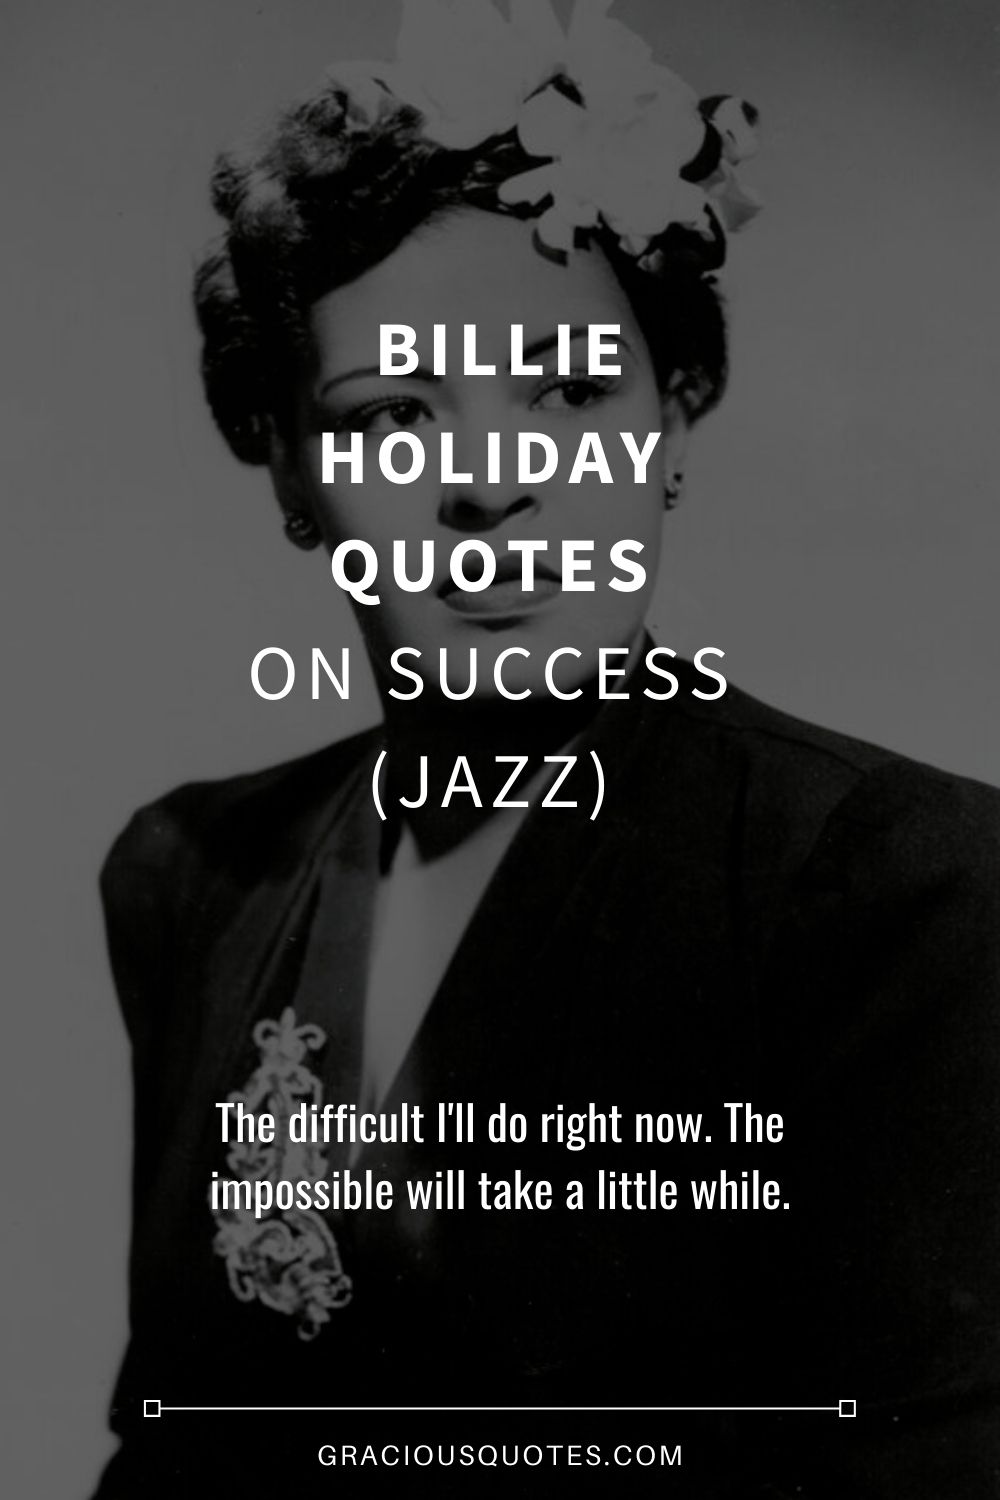 Billie Holiday Quotes on Success (JAZZ) - Gracious Quotes